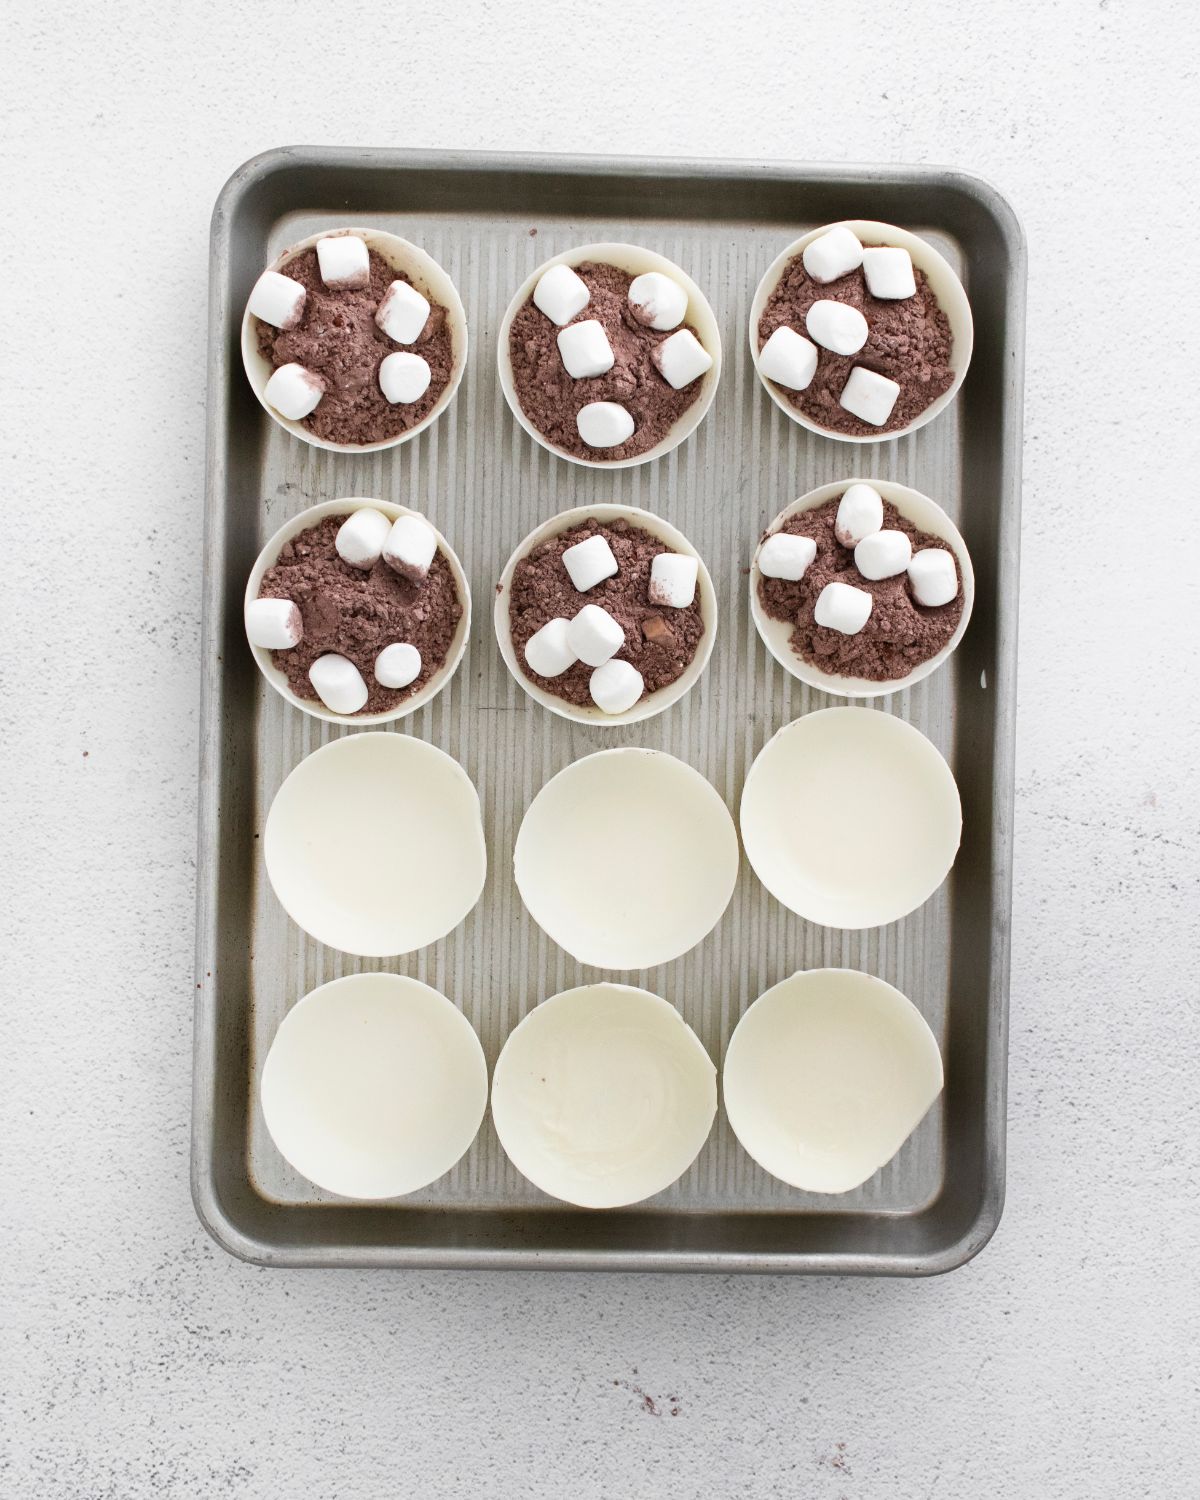 White chocolate molds in baking pan, half of it have cocoa mix and few mini marshmallows.